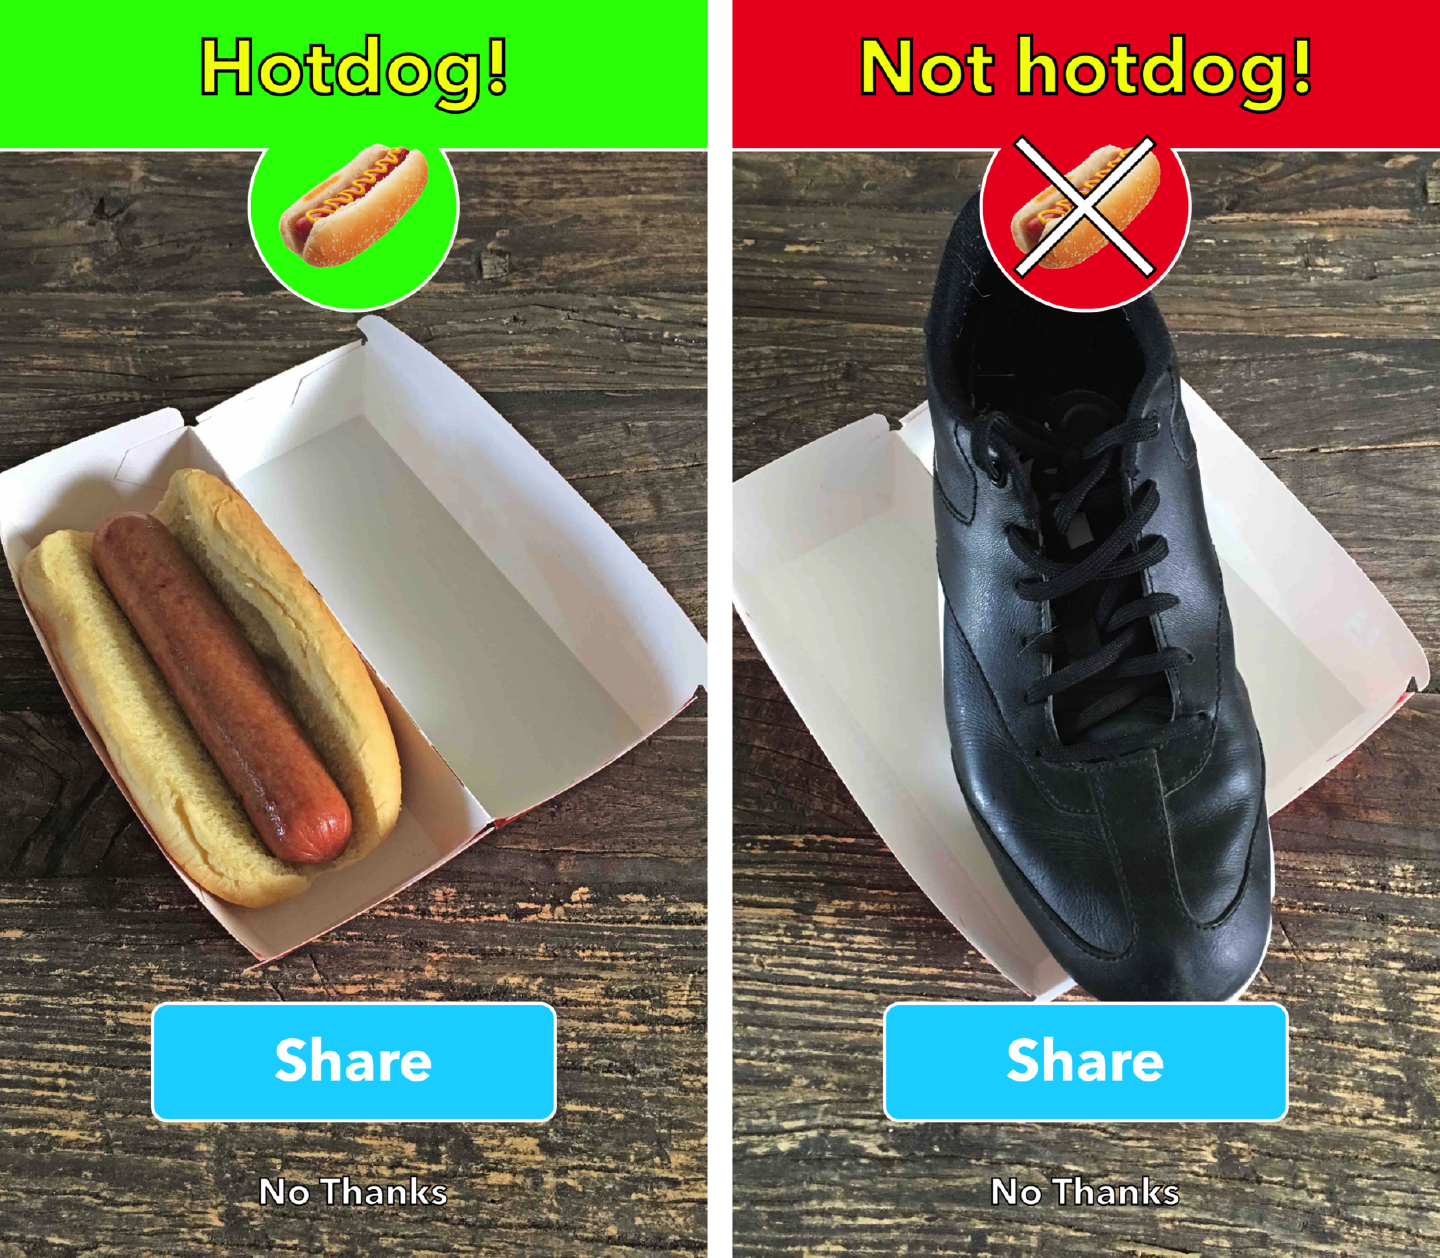 The Not Hotdog app in action (image source: Apple App Store listing for the Not Hotdog app)